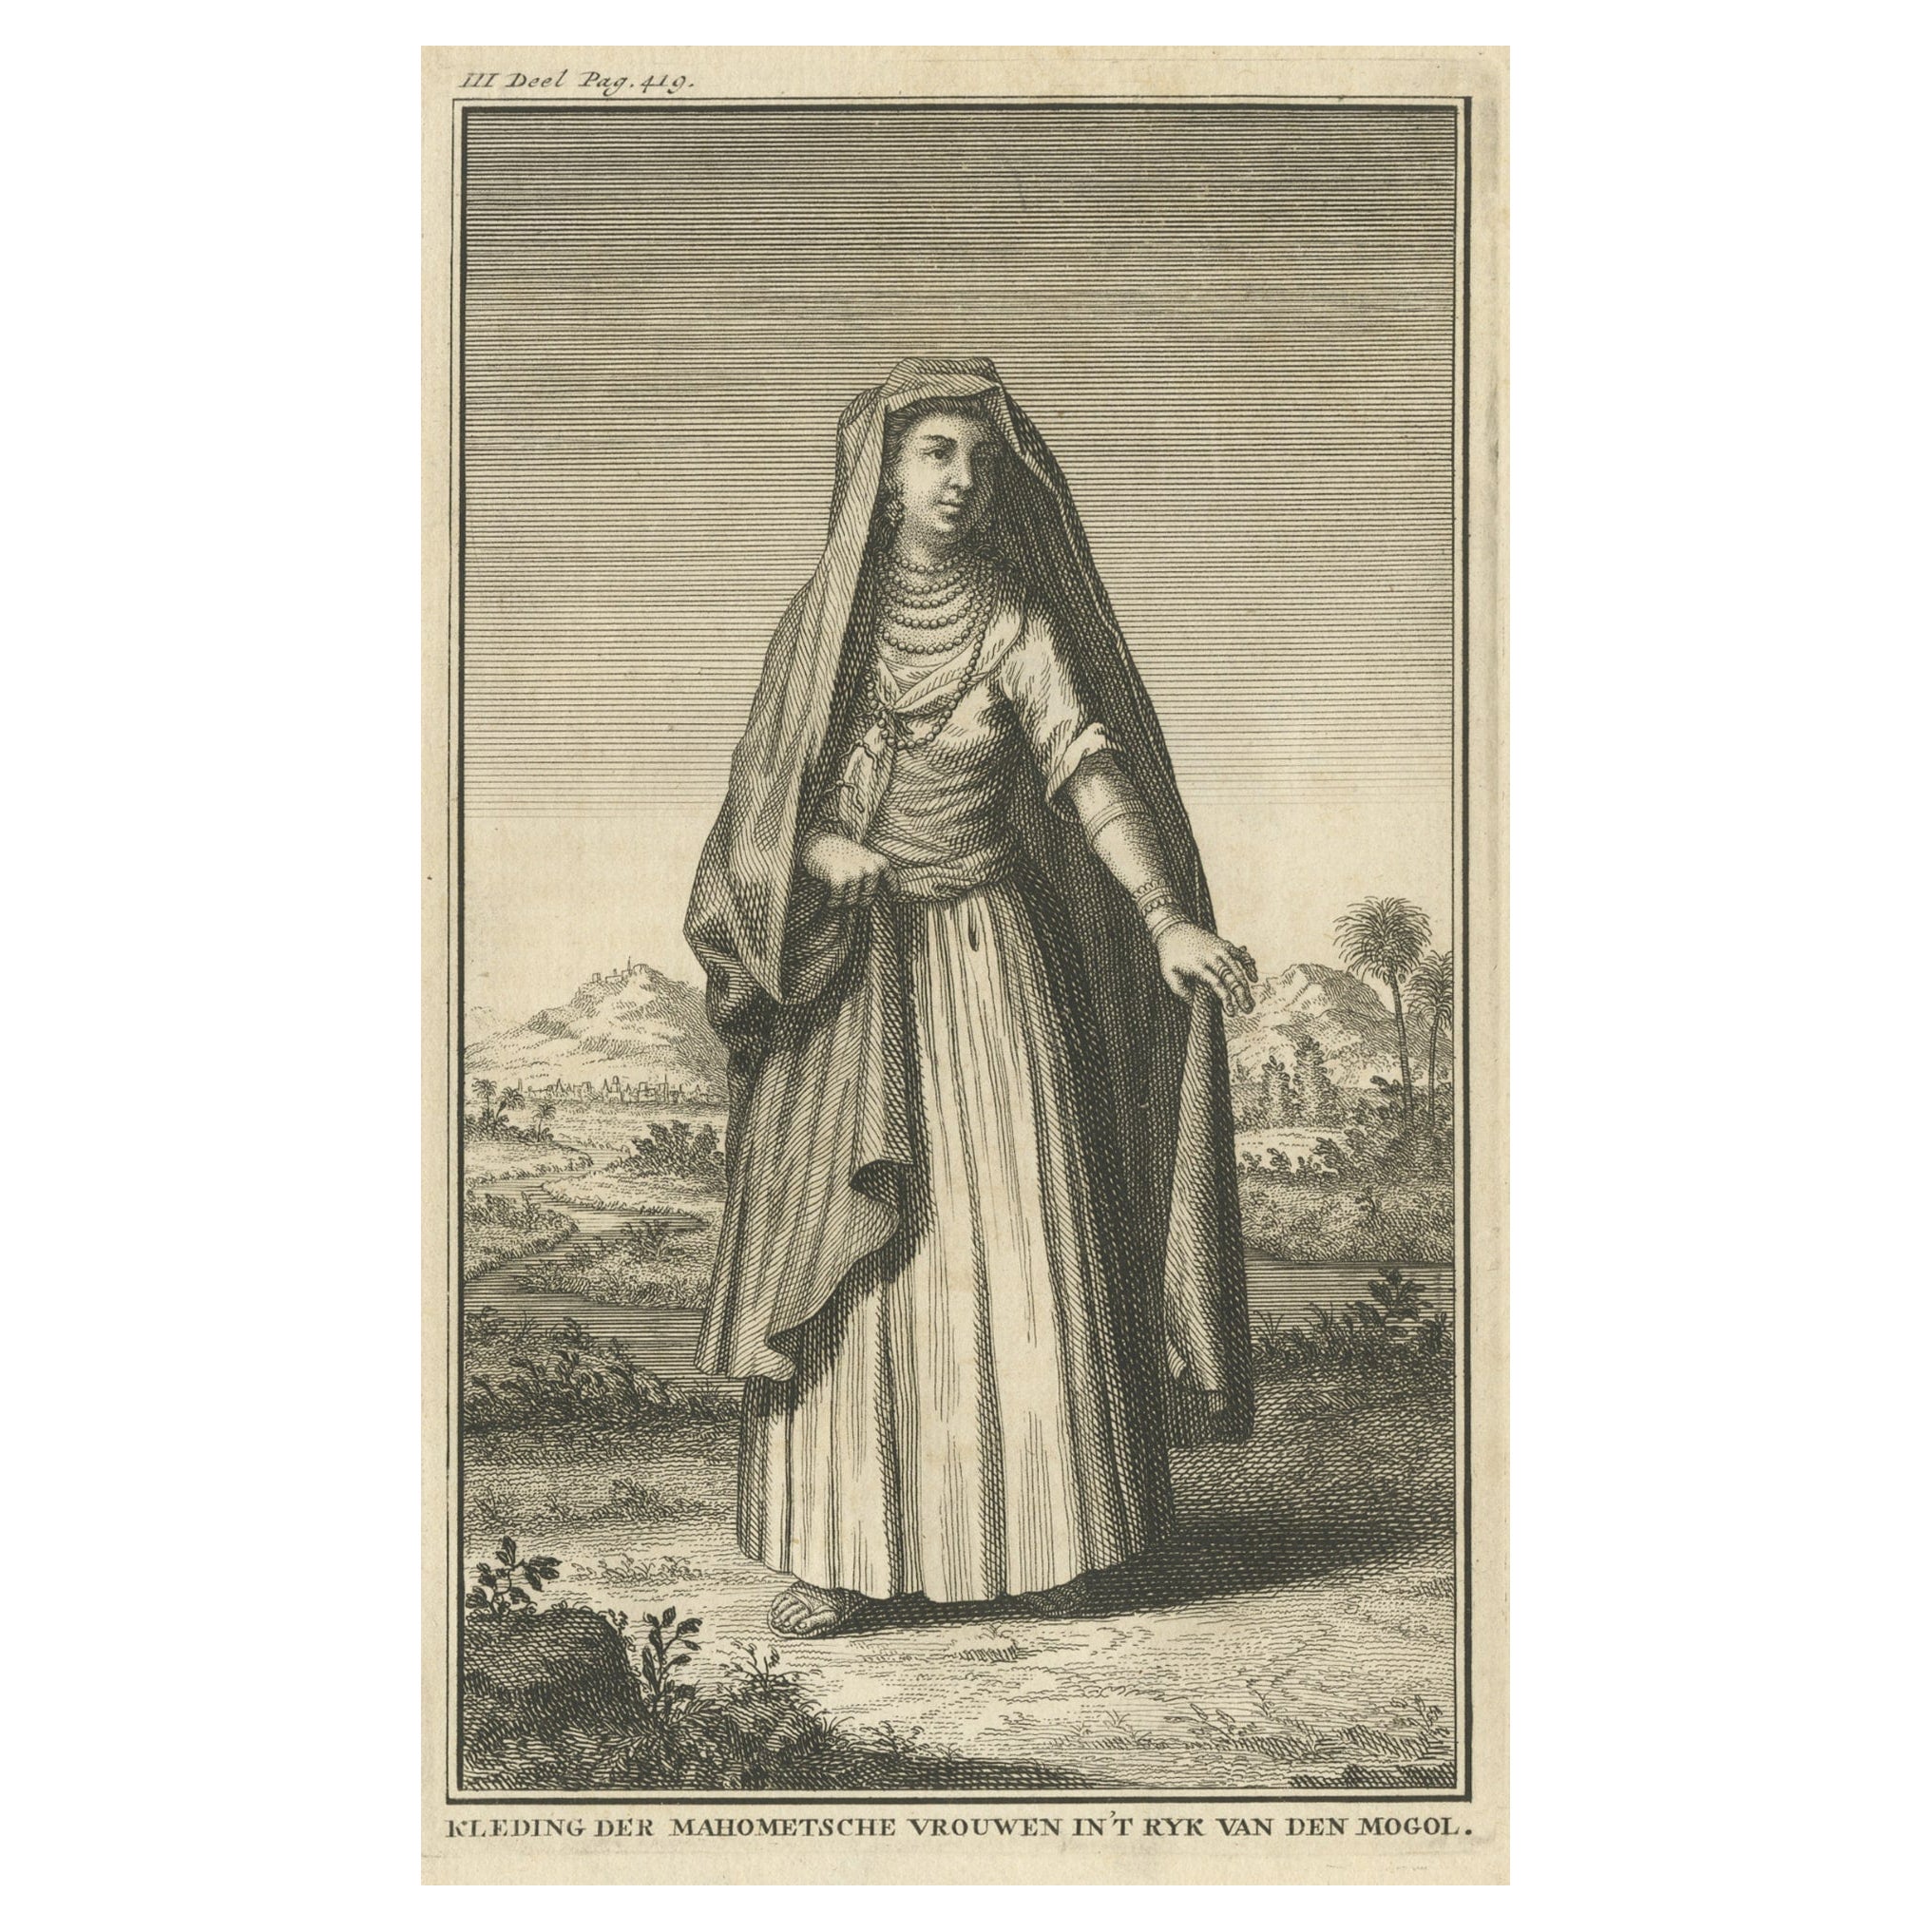 Engraving of a Costume of the Muslim Women in the Mogol or Mughal Empire, 1731